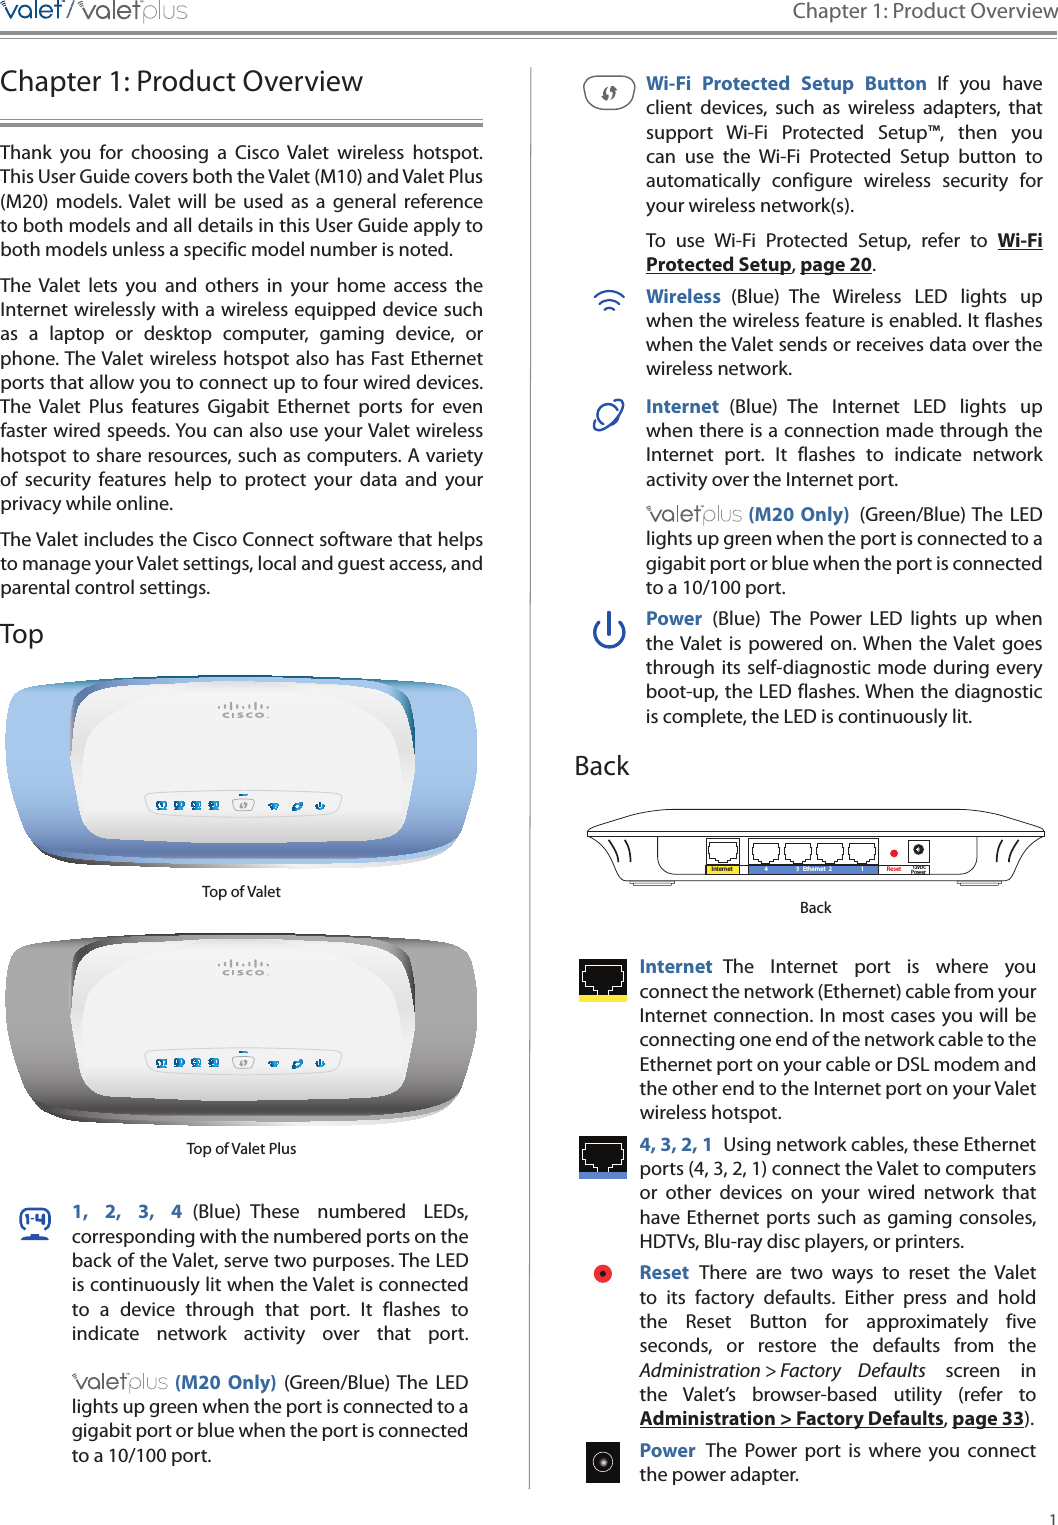 1Chapter 1: Product Overview/////Chapter 1: Product OverviewThank  you  for  choosing  a  Cisco  Valet  wireless  hotspot. This User Guide covers both the Valet (M10) and Valet Plus (M20)  models. Valet  will  be  used  as  a  general  reference to both models and all details in this User Guide apply to both models unless a specific model number is noted. The  Valet  lets  you  and  others  in  your  home  access  the Internet wirelessly with a wireless equipped device such as  a  laptop  or  desktop  computer,  gaming  device,  or phone. The Valet wireless hotspot also has Fast Ethernet ports that allow you to connect up to four wired devices. The  Valet  Plus  features  Gigabit  Ethernet  ports  for  even faster wired speeds. You can also use your Valet wireless hotspot to share resources, such as computers. A variety of  security  features  help  to  protect  your  data  and  your privacy while online. The Valet includes the Cisco Connect software that helps to manage your Valet settings, local and guest access, and parental control settings.TopTop of ValetTop of Valet Plus1,  2,  3,  4  (Blue)  These  numbered  LEDs, corresponding with the numbered ports on the back of the Valet, serve two purposes. The LED is continuously lit when the Valet is connected to  a  device  through  that  port.  It  flashes  to indicate  network  activity  over  that  port.    (M20  Only)  (Green/Blue) The  LED lights up green when the port is connected to a gigabit port or blue when the port is connected to a 10/100 port. Wi-Fi  Protected  Setup  Button  If  you  have client  devices,  such  as  wireless  adapters,  that support  Wi-Fi  Protected  Setup™,  then  you can  use  the  Wi-Fi  Protected  Setup  button  to automatically  configure  wireless  security  for your wireless network(s).To  use  Wi-Fi  Protected  Setup,  refer  to  Wi-Fi Protected Setup, page 20.Wireless  (Blue)  The  Wireless  LED  lights  up when the wireless feature is enabled. It flashes when the Valet sends or receives data over the wireless network.Internet  (Blue)  The  Internet  LED  lights  up when there is a connection made through the Internet  port.  It  flashes  to  indicate  network activity over the Internet port.  (M20 Only)  (Green/Blue) The  LED lights up green when the port is connected to a gigabit port or blue when the port is connected to a 10/100 port. Power  (Blue)  The  Power  LED  lights  up  when the Valet is  powered on. When  the Valet goes through its self-diagnostic mode during every boot-up, the LED flashes. When the diagnostic is complete, the LED is continuously lit.BackInternet Ethernet4 3 2 1 Reset Power12VDCBackInternet  The  Internet  port  is  where  you connect the network (Ethernet) cable from your Internet connection. In most cases you will be connecting one end of the network cable to the Ethernet port on your cable or DSL modem and the other end to the Internet port on your Valet wireless hotspot. 4, 3, 2, 1  Using network cables, these Ethernet ports (4, 3, 2, 1) connect the Valet to computers or  other  devices  on  your  wired  network  that have Ethernet ports such  as gaming consoles, HDTVs, Blu-ray disc players, or printers. Reset  There  are  two  ways  to  reset  the  Valet to  its  factory  defaults.  Either  press  and  hold the  Reset  Button  for  approximately  five seconds,  or  restore  the  defaults  from  the Administration &gt; Factory  Defaults  screen  in the  Valet’s  browser-based  utility  (refer  to Administration &gt; Factory Defaults, page 33).Power  The  Power  port  is  where  you  connect the power adapter.